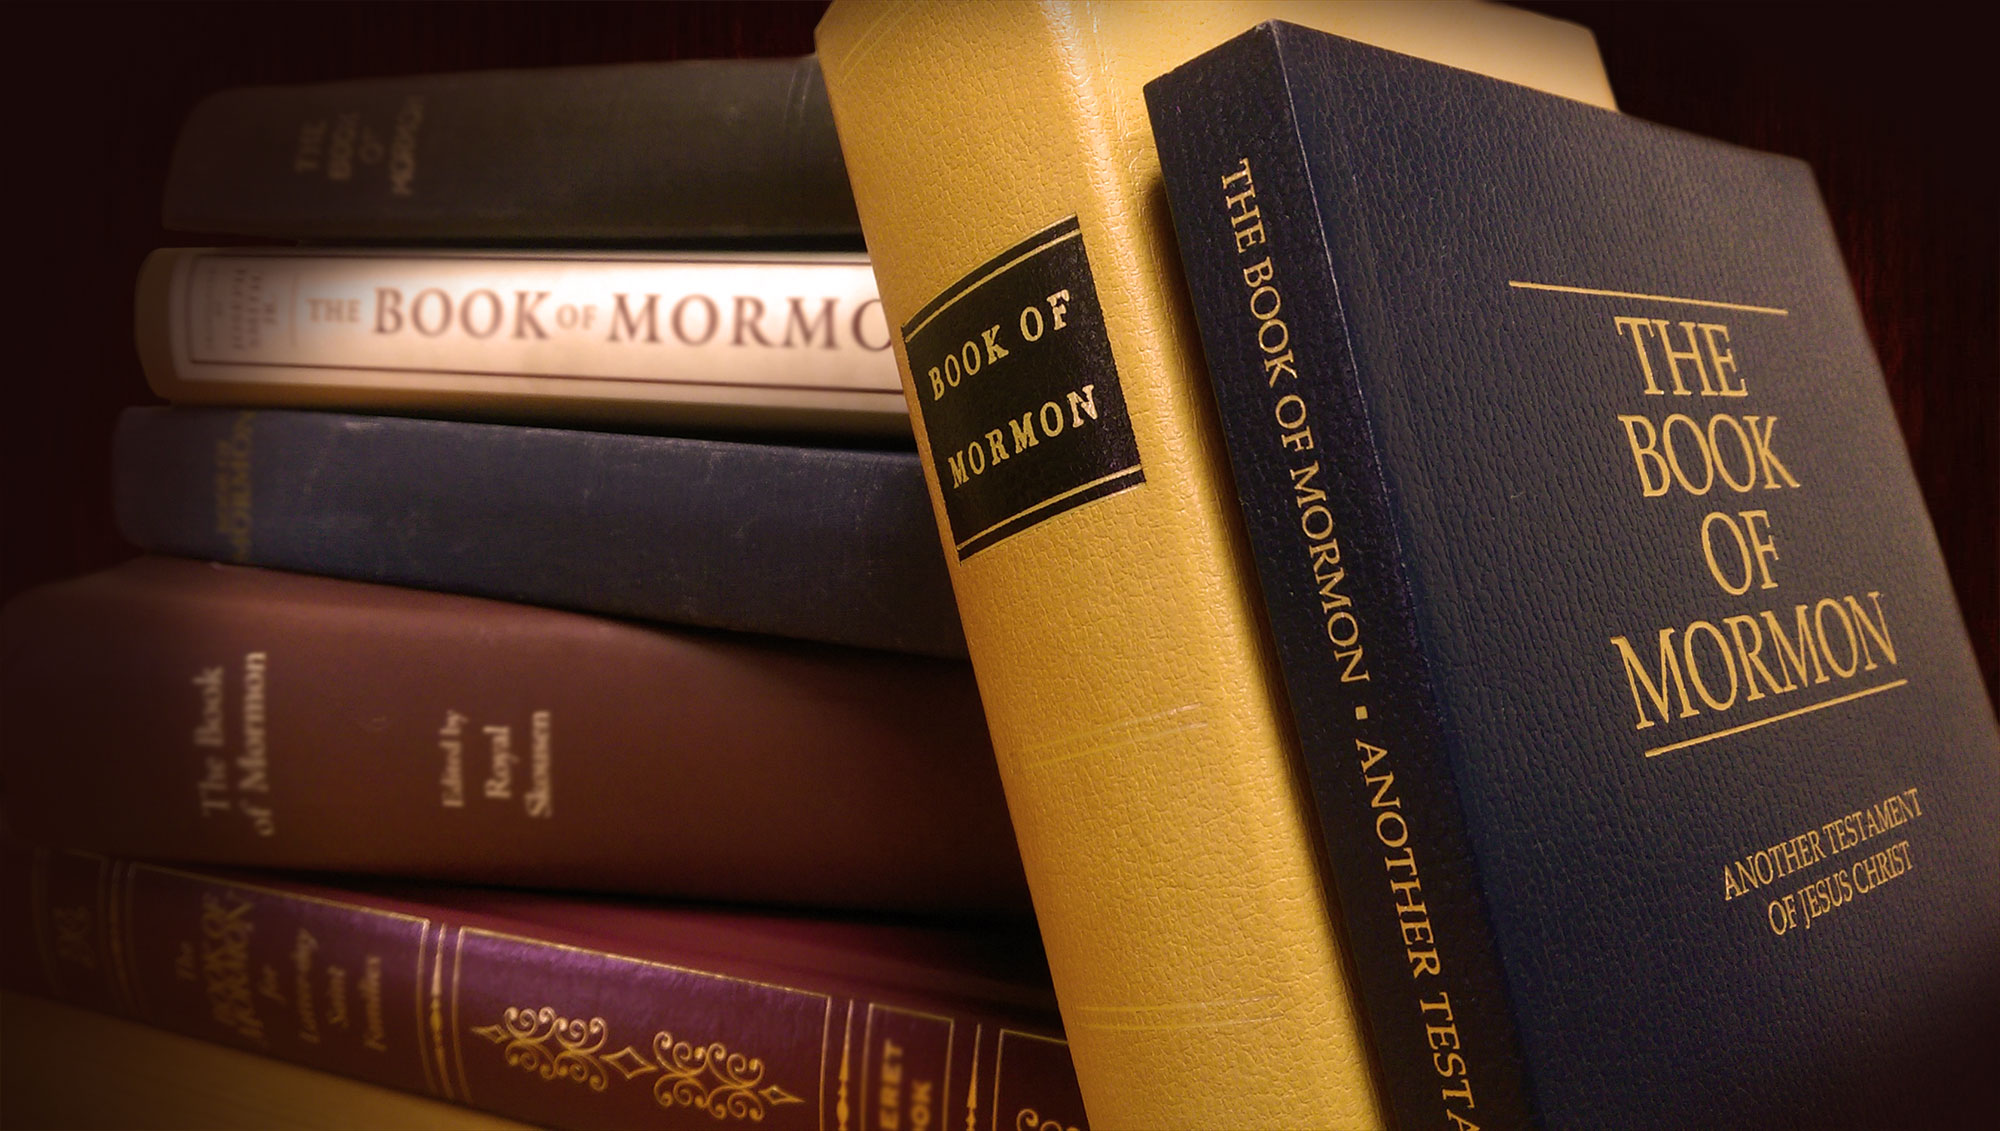 Two copies of The Book of Mormon lean against a stack of several other copies of various publishers and editions.